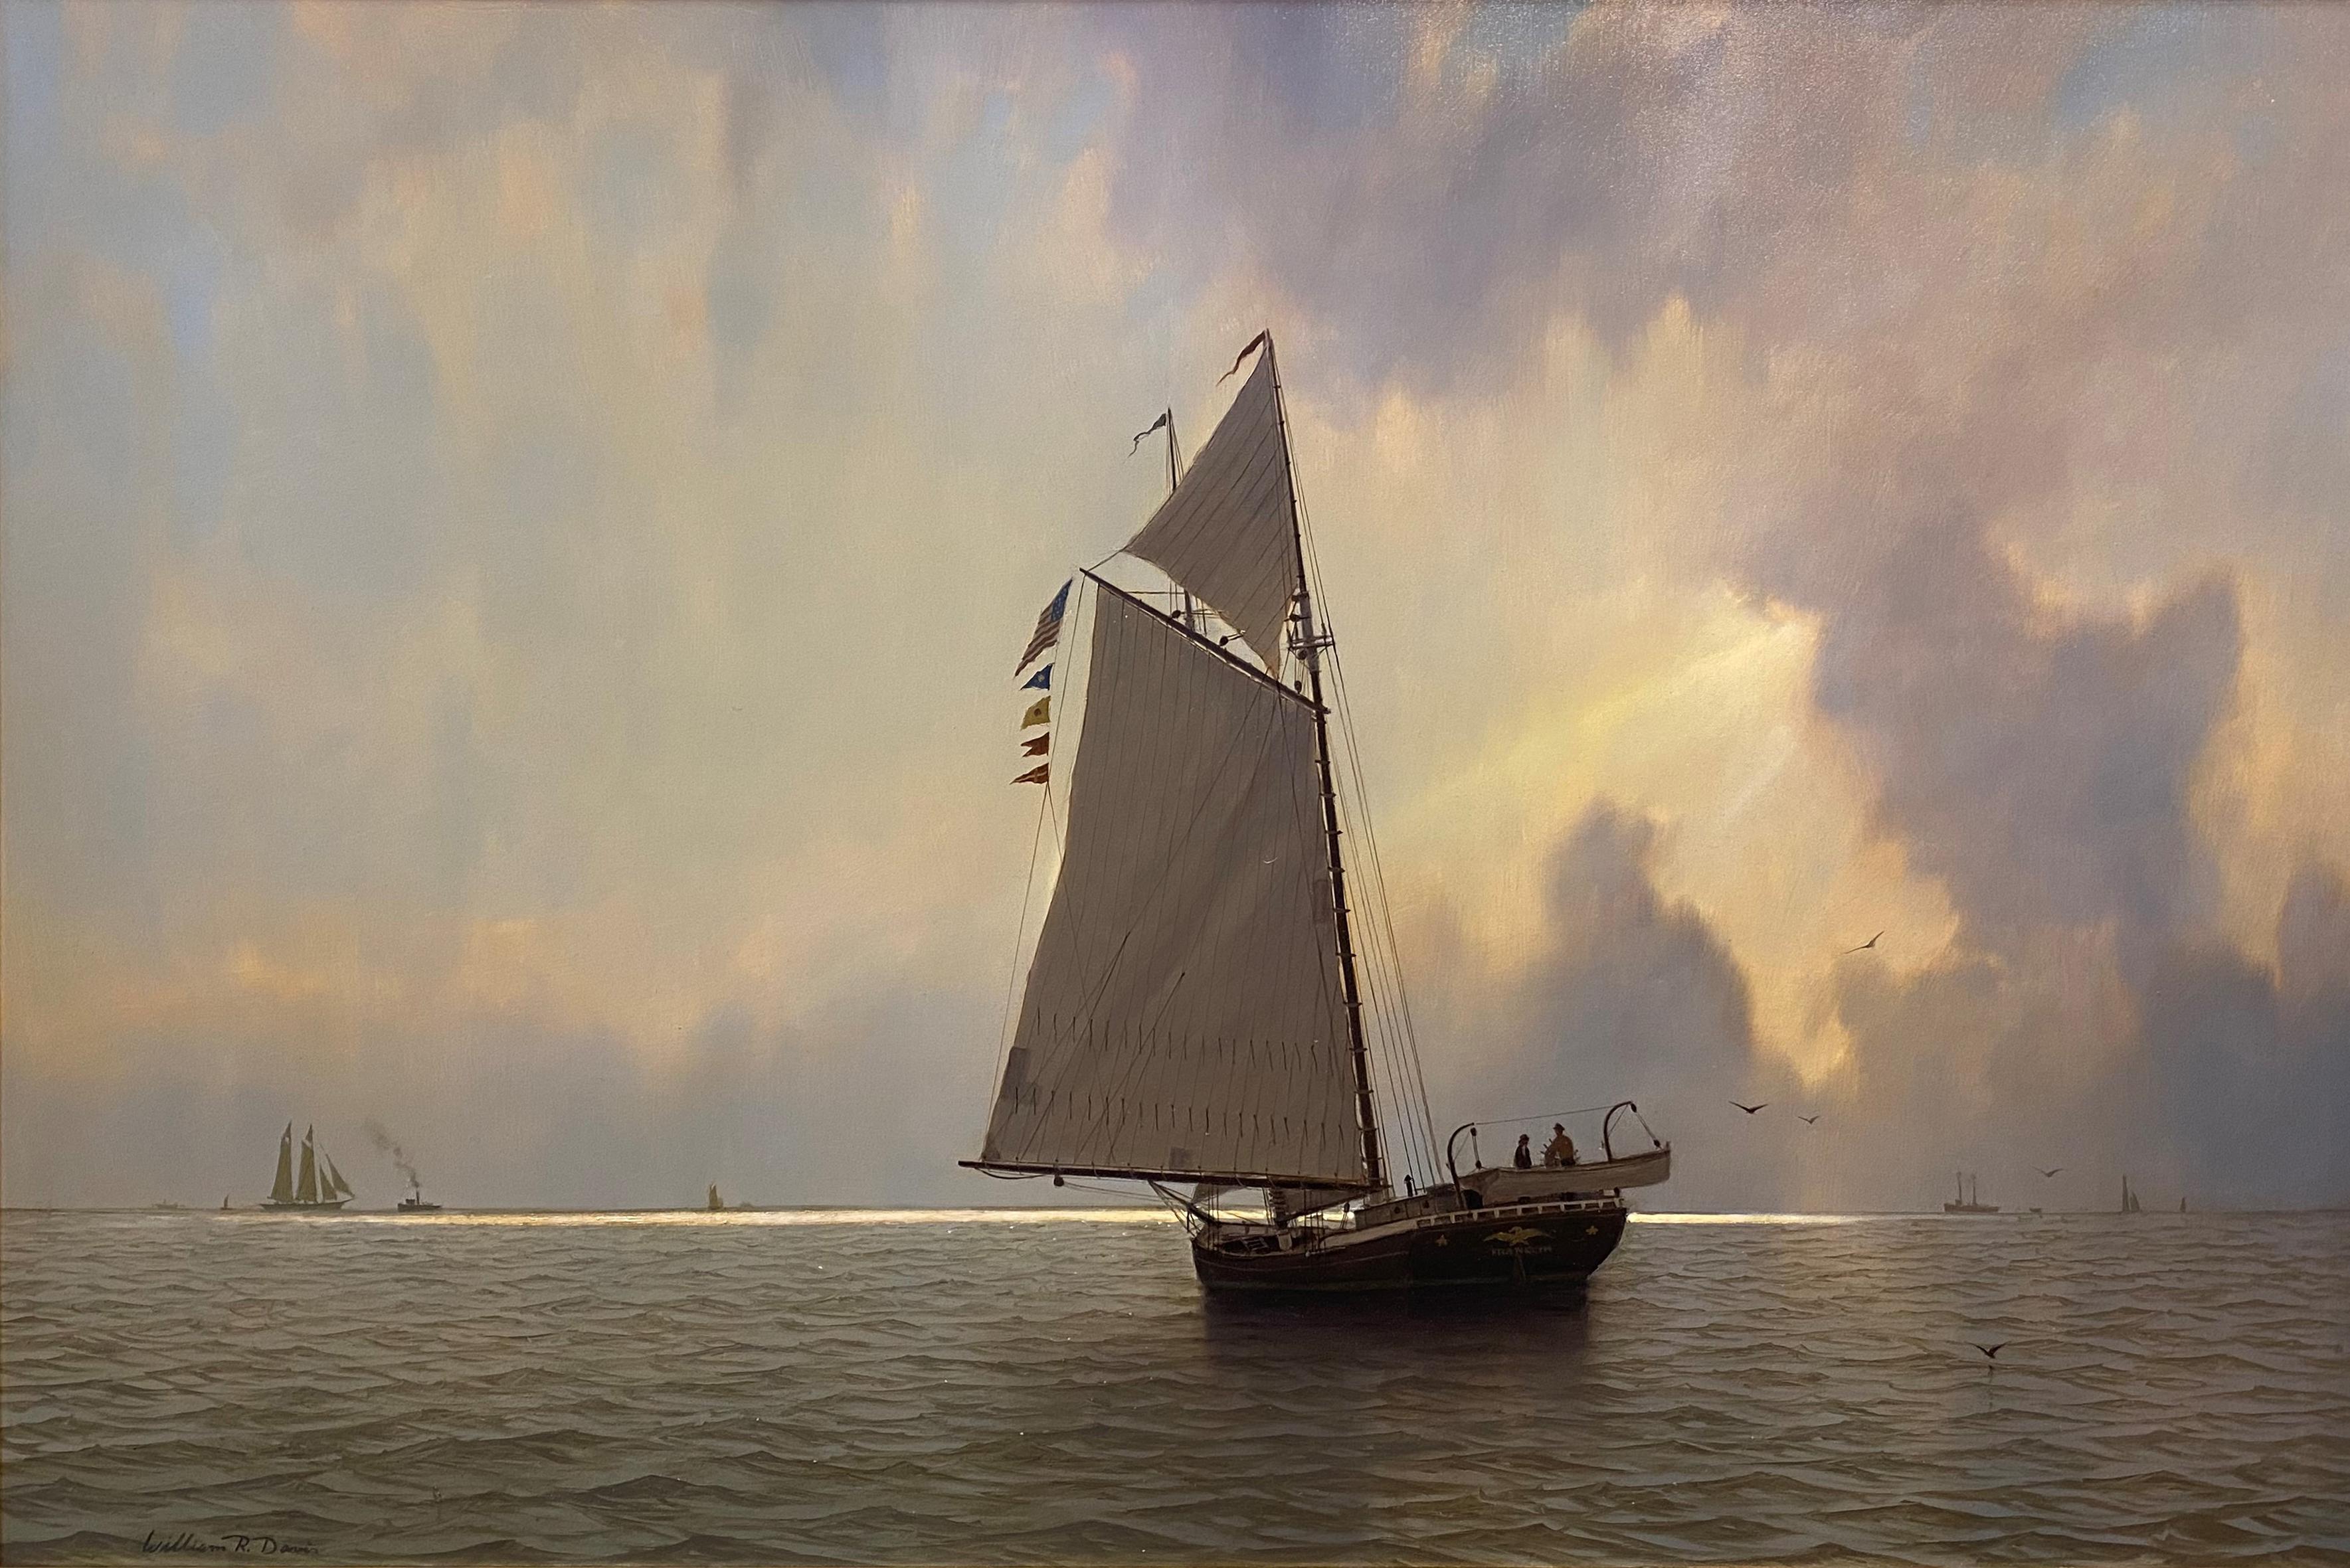 Drifting in Light Wind - Painting by William R. Davis